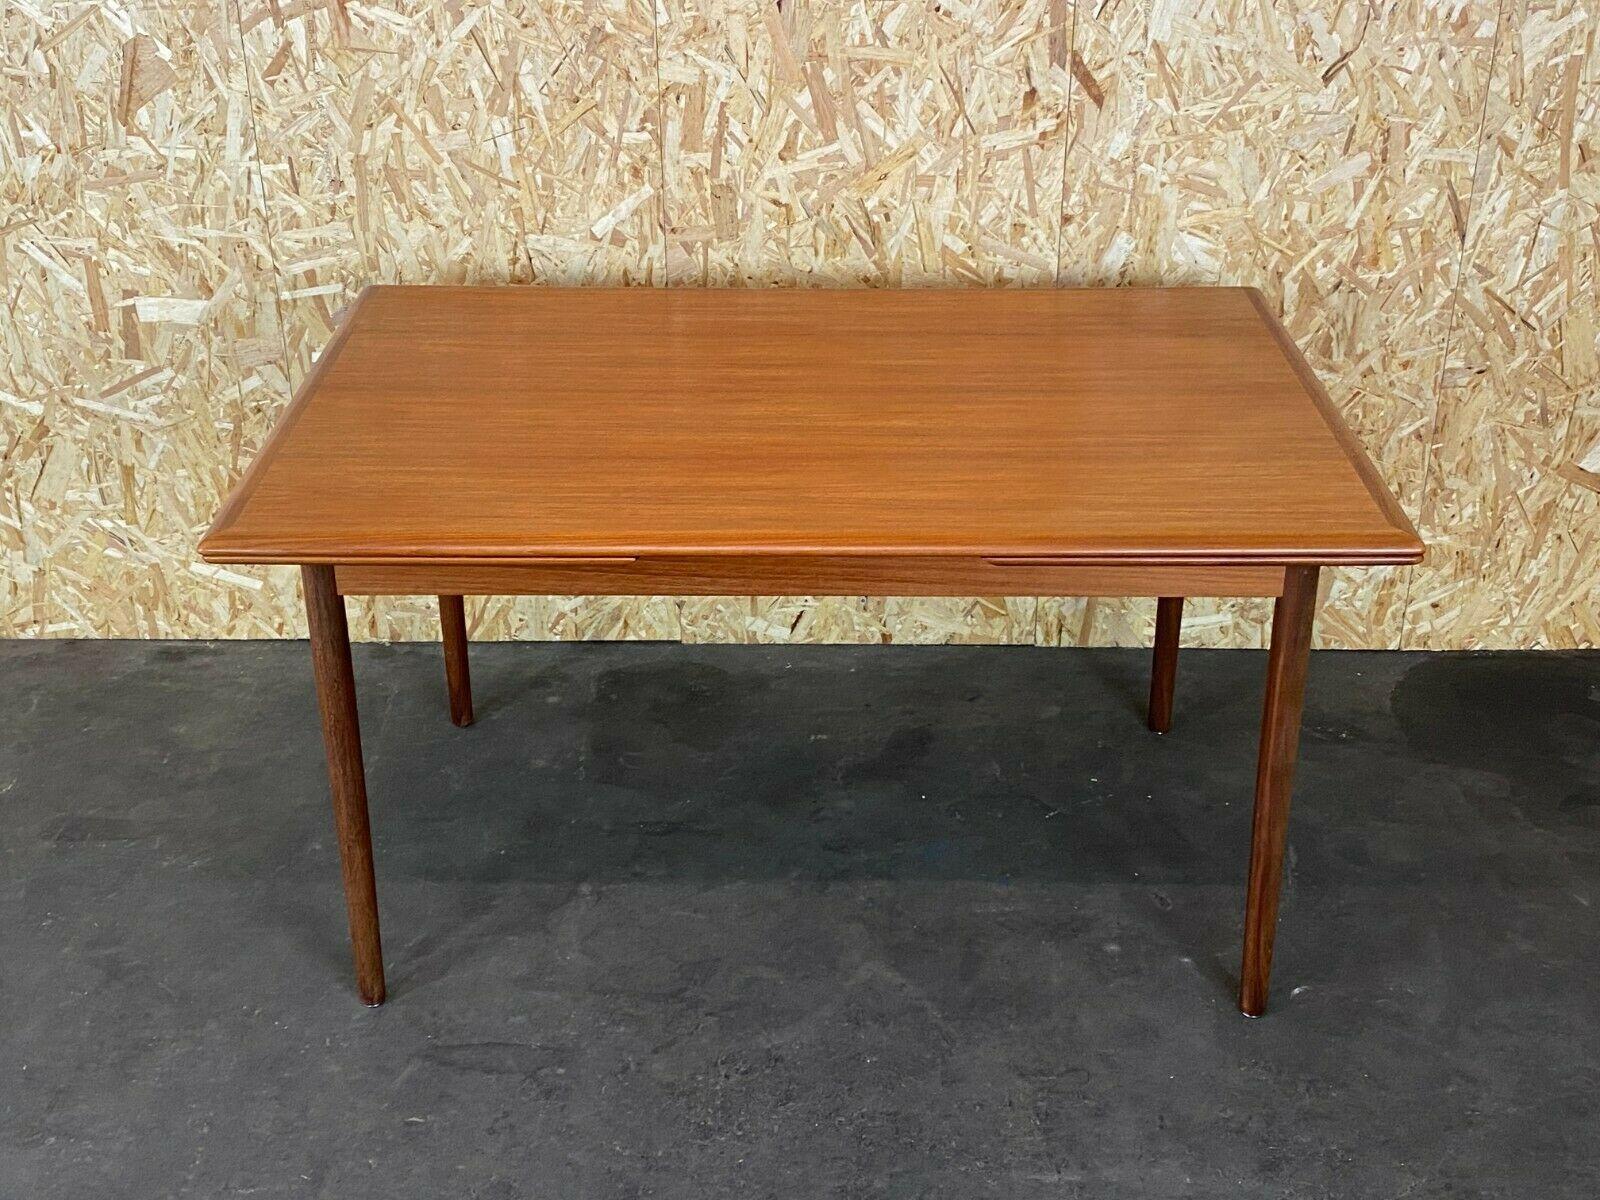 60s 70s teak dining table dining table Danish Modern Design Denmark 60s 70s

Object: dining table / dining table

Manufacturer:

Condition: good - vintage

Age: around 1960-1970

Dimensions:

(+ 2x 48cm) 135cm x 89cm x 73cm

Other